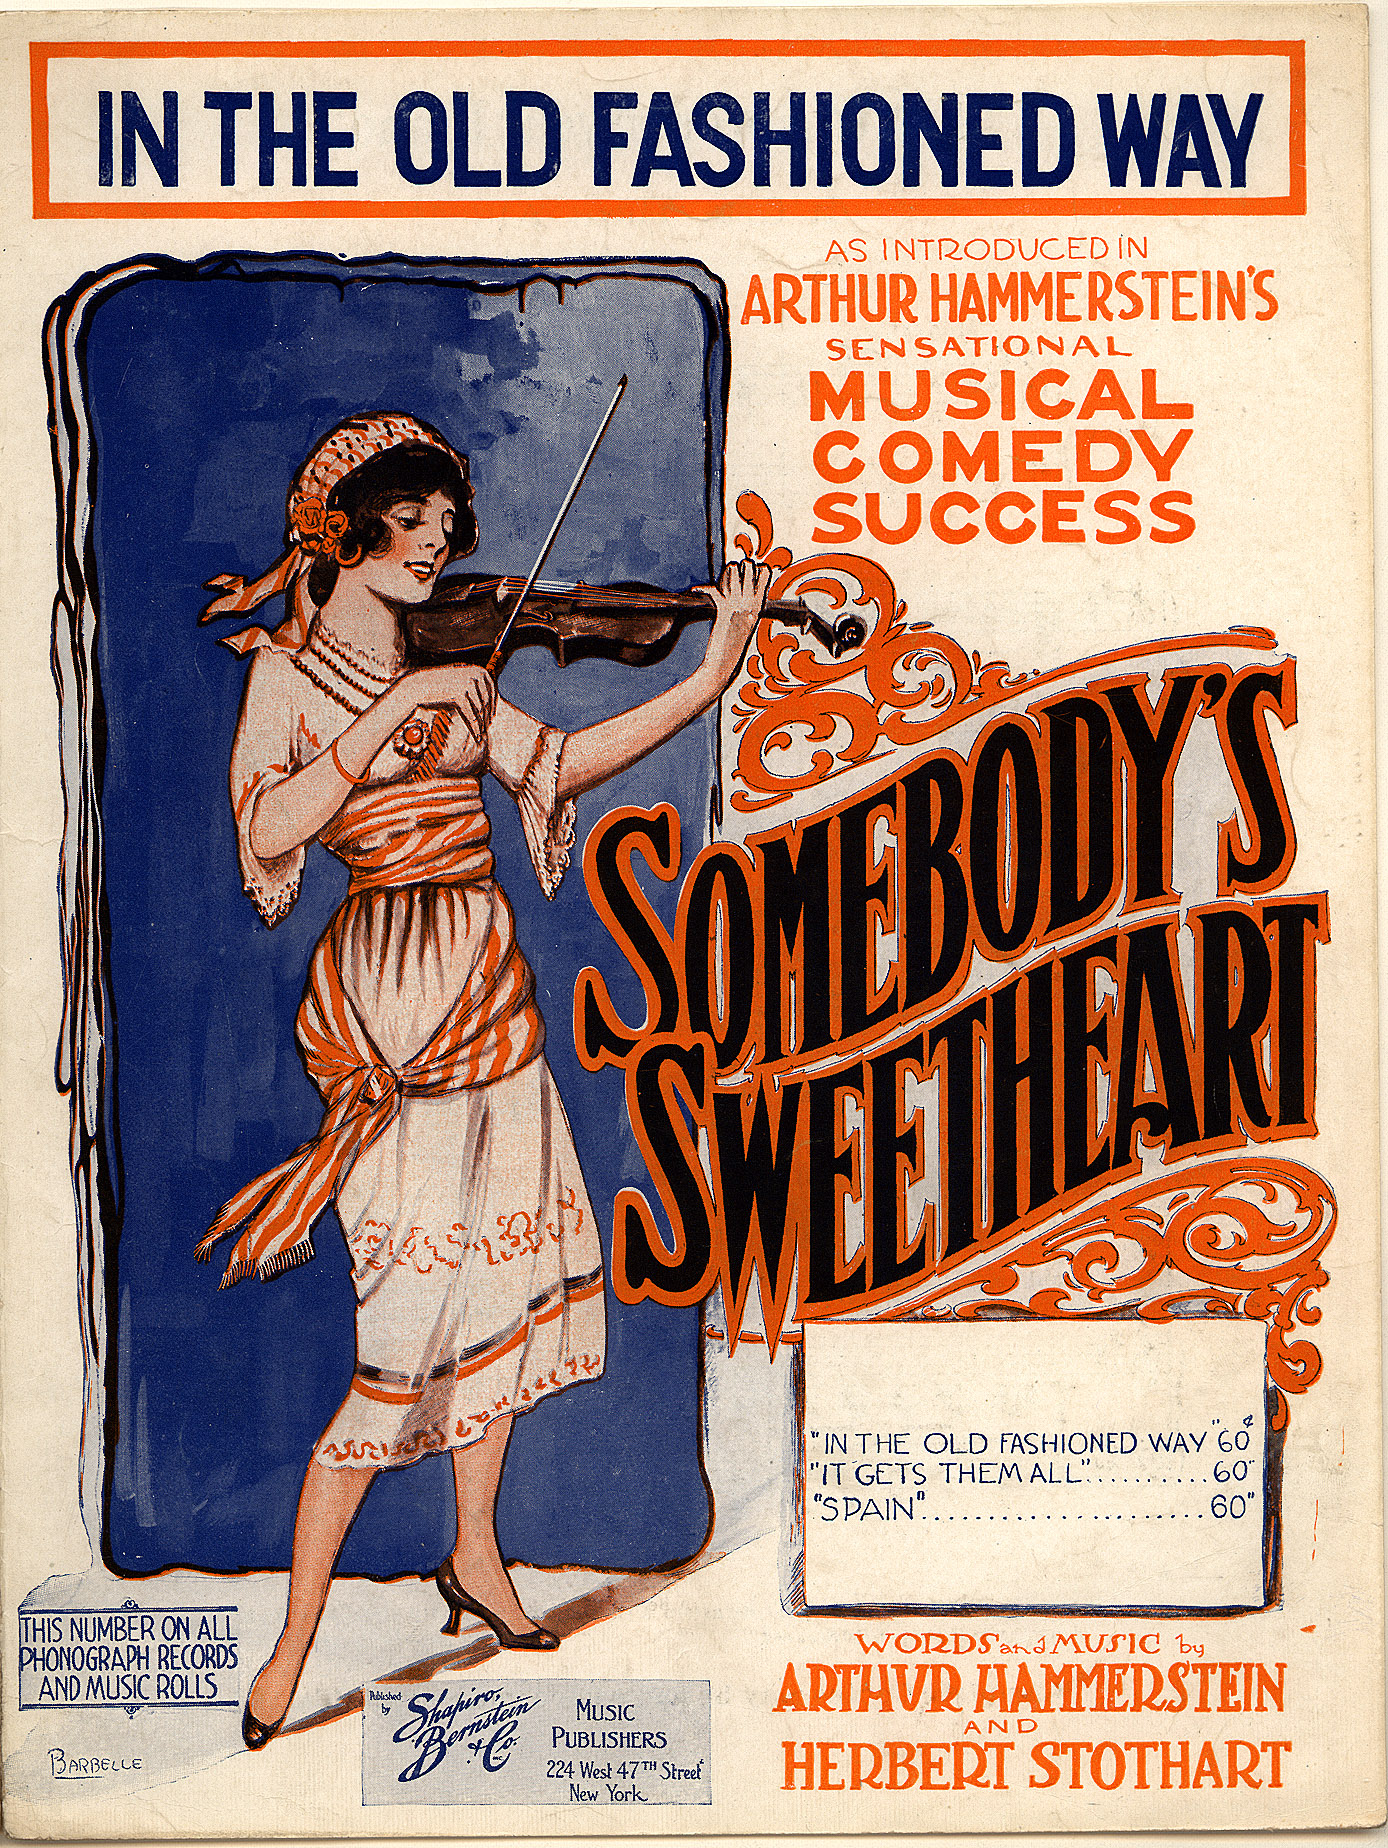 150dpi JPEG image of: In the old fashioned way; Somebody's sweetheart